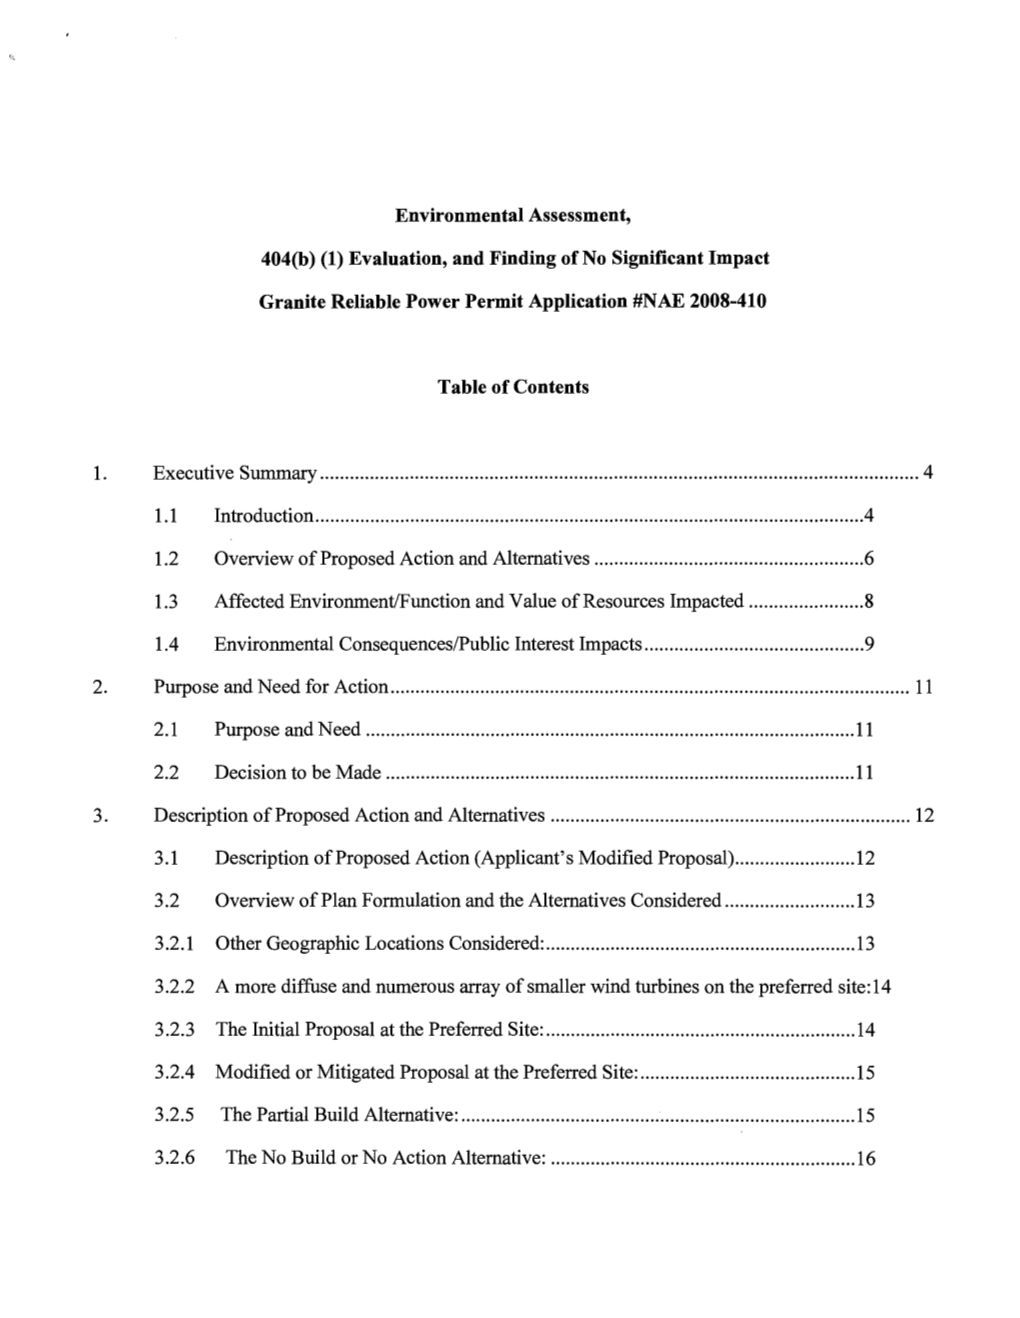 Environmental Assessment, 404(B) (1) Evaluation, and Finding of No